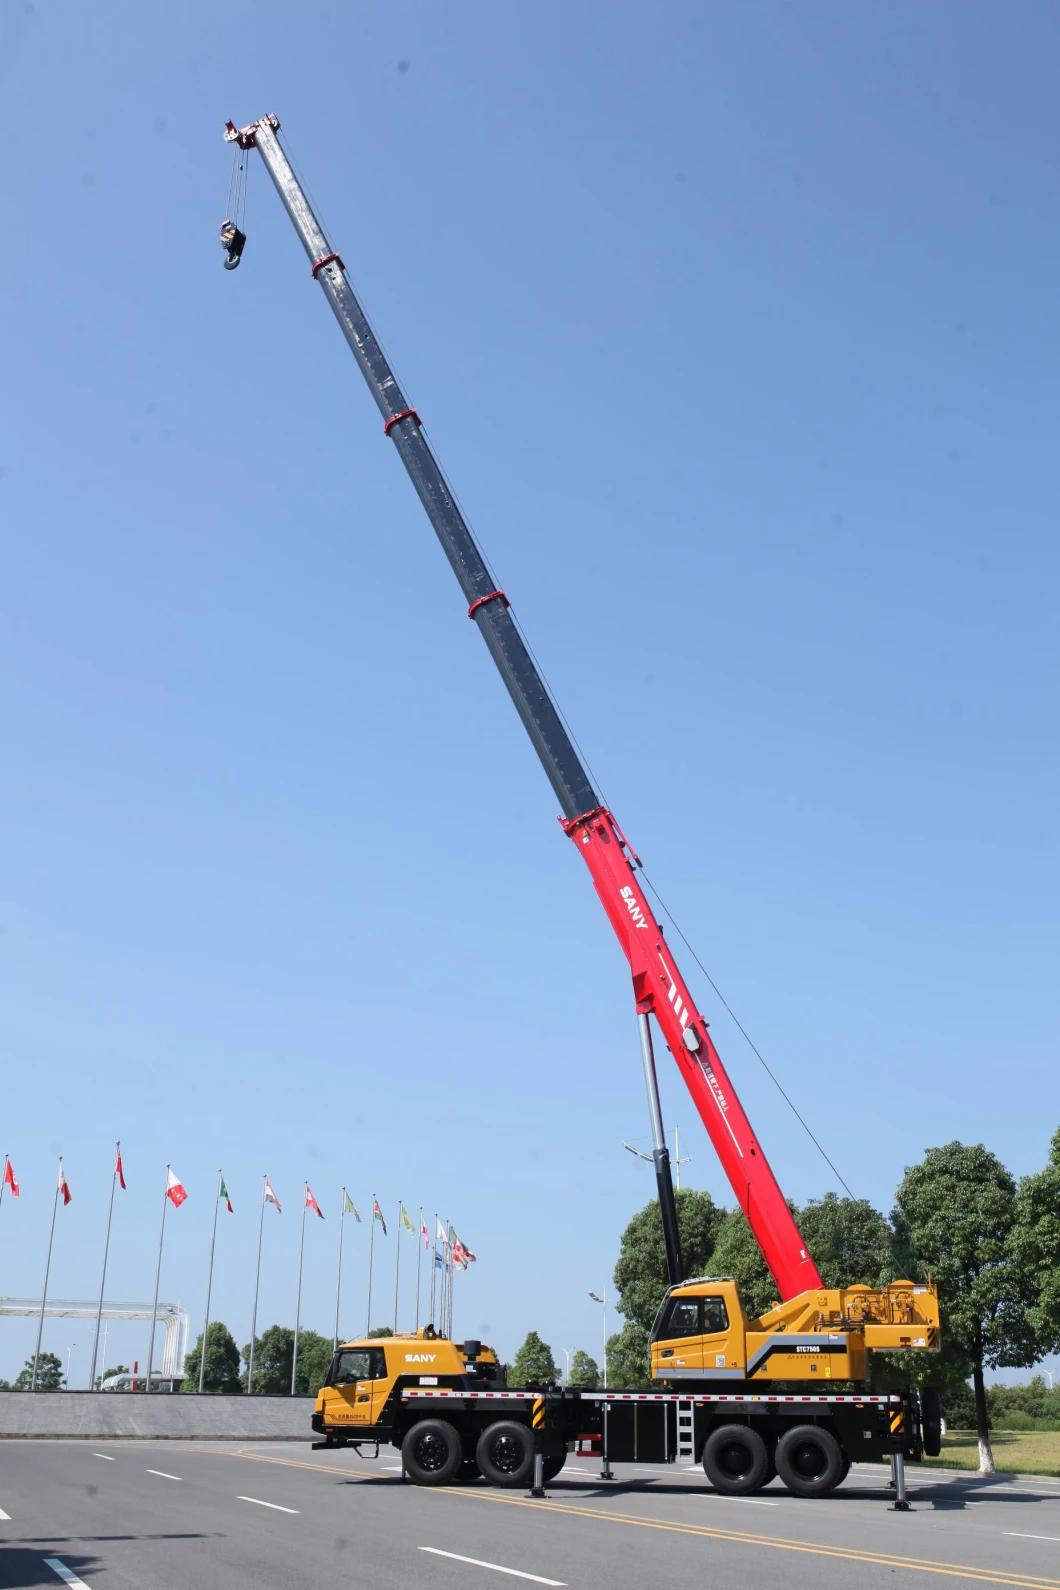 Stc400t 40 Ton Truck Crane with Factory Price